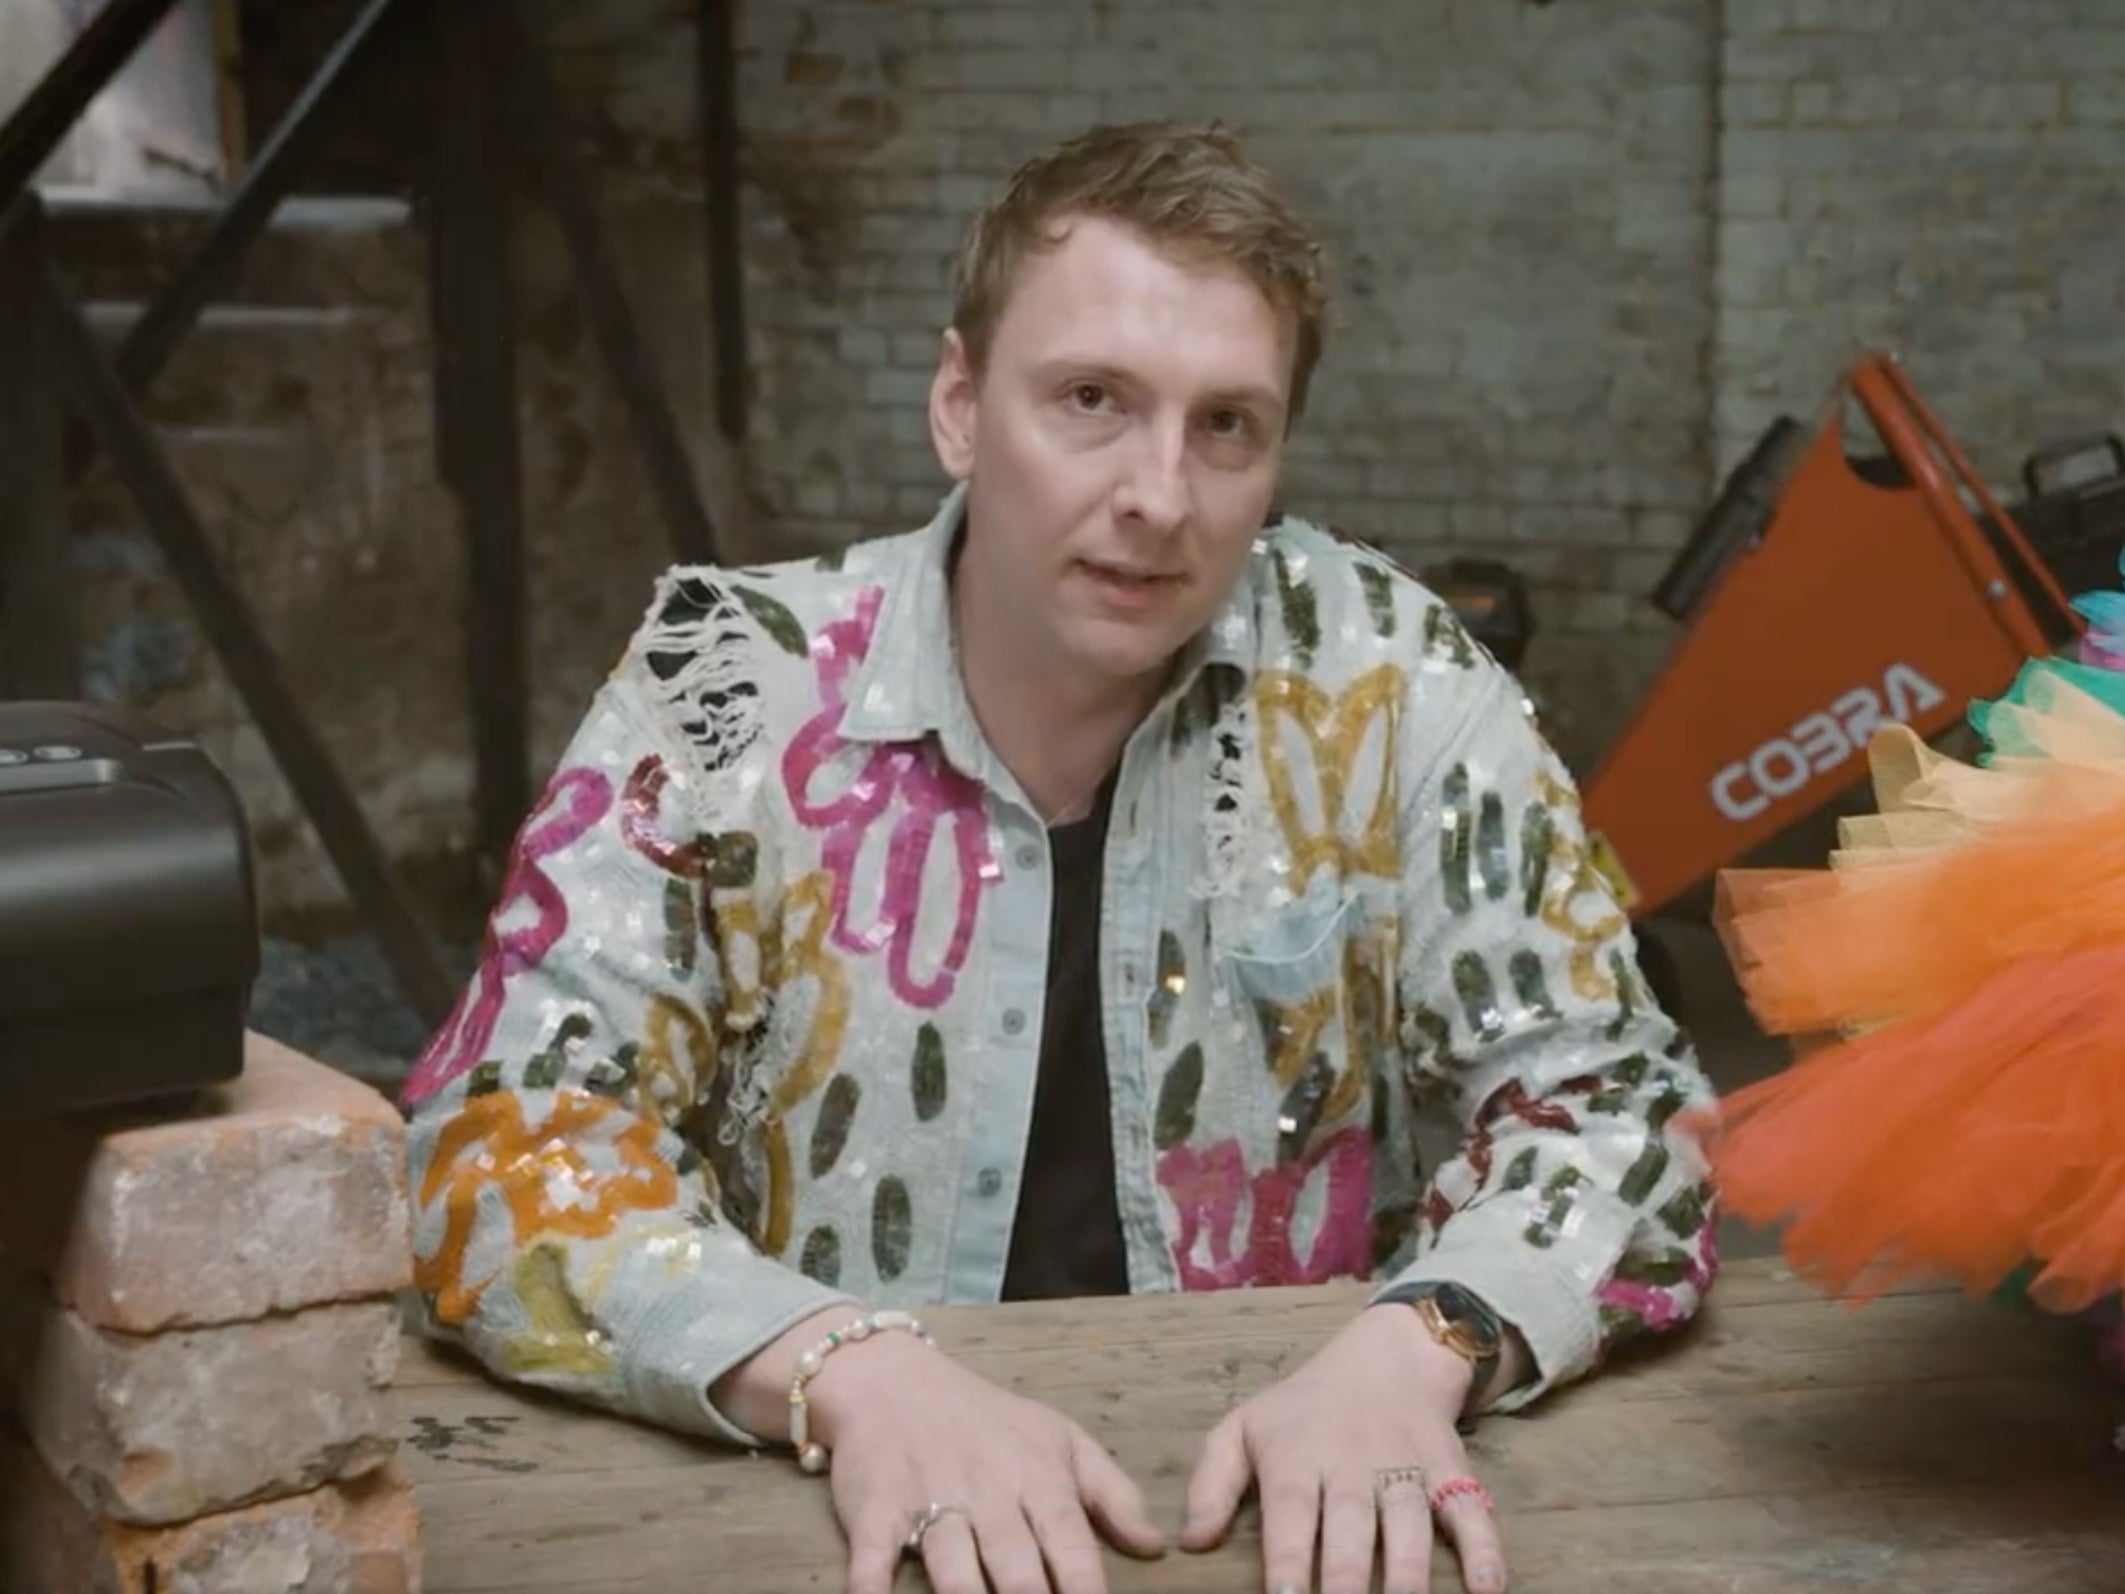 Joe Lycett uses his comedic stance to tackle politics in an accessible way